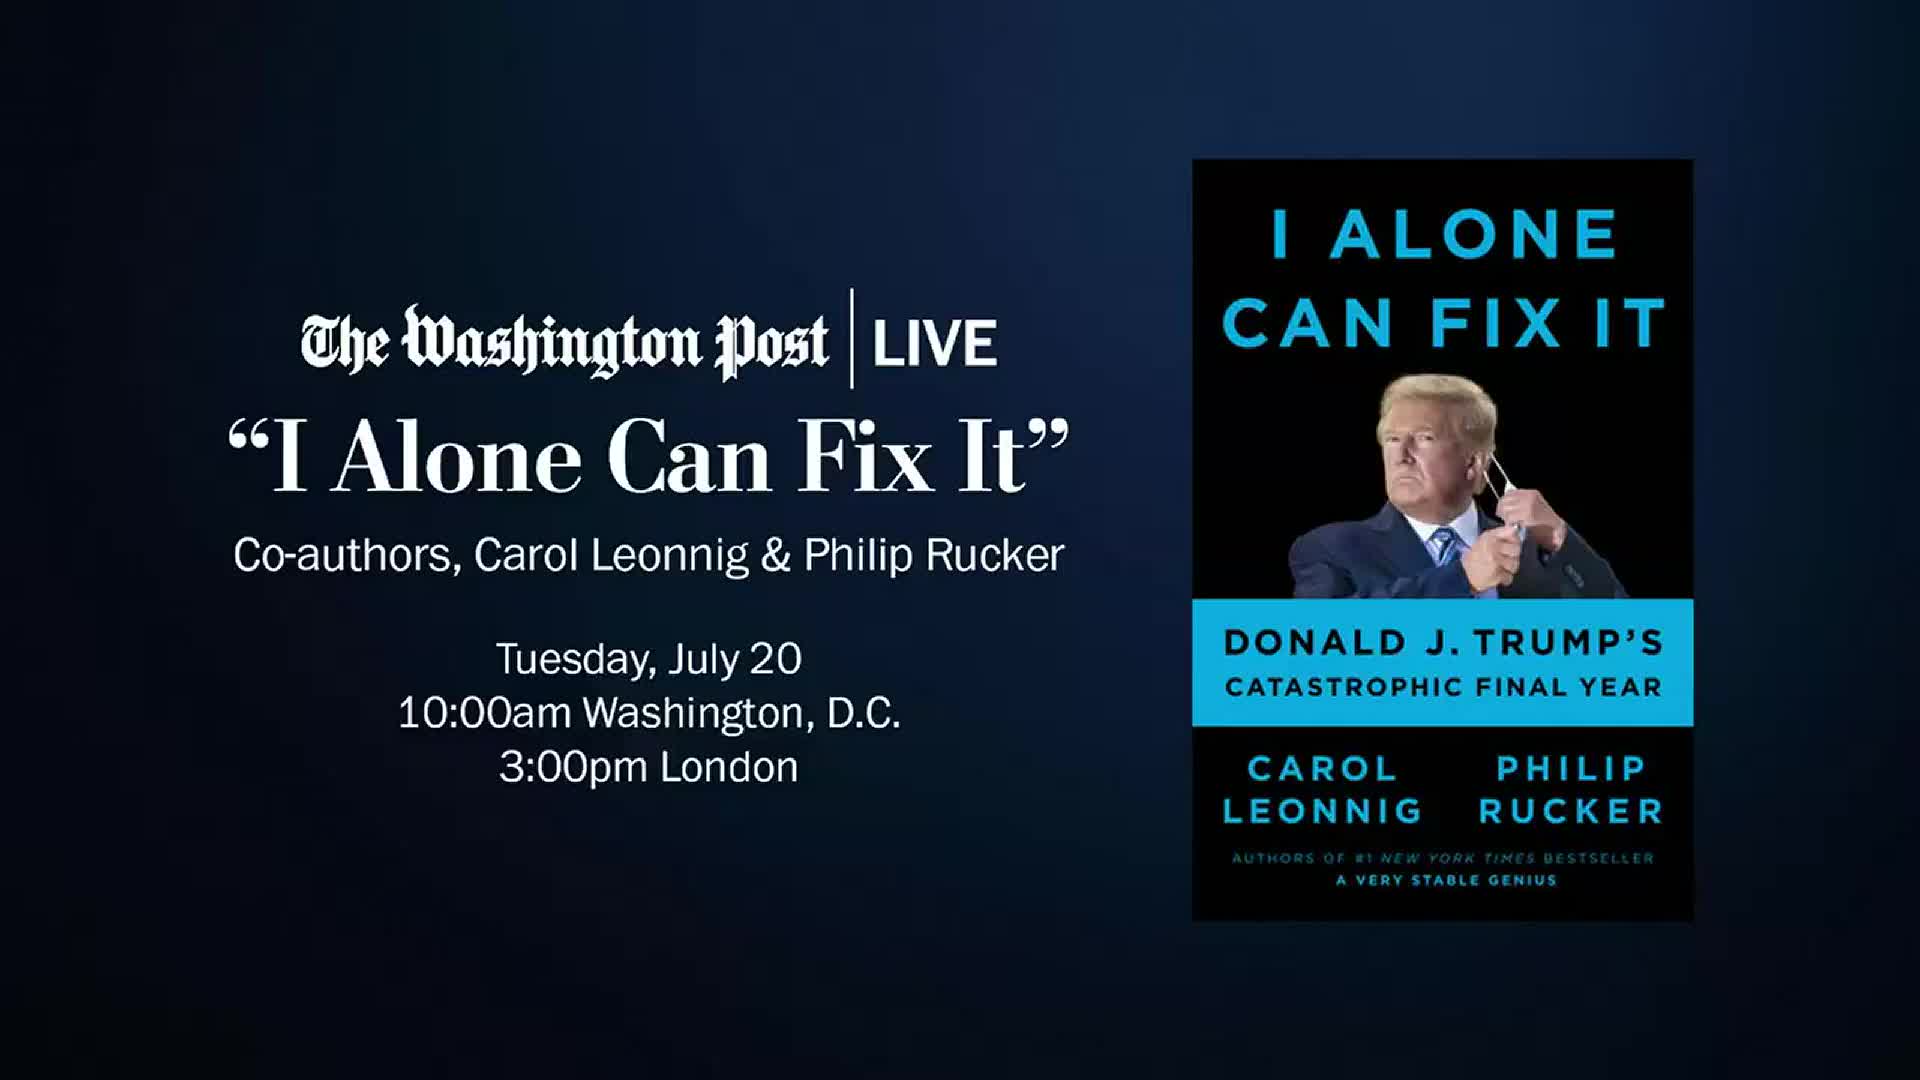 Rucker　Fix　I　Co-Authors　Philip　with　Alone　Leonnig　Can　Carol　It”　The　Washington　Post